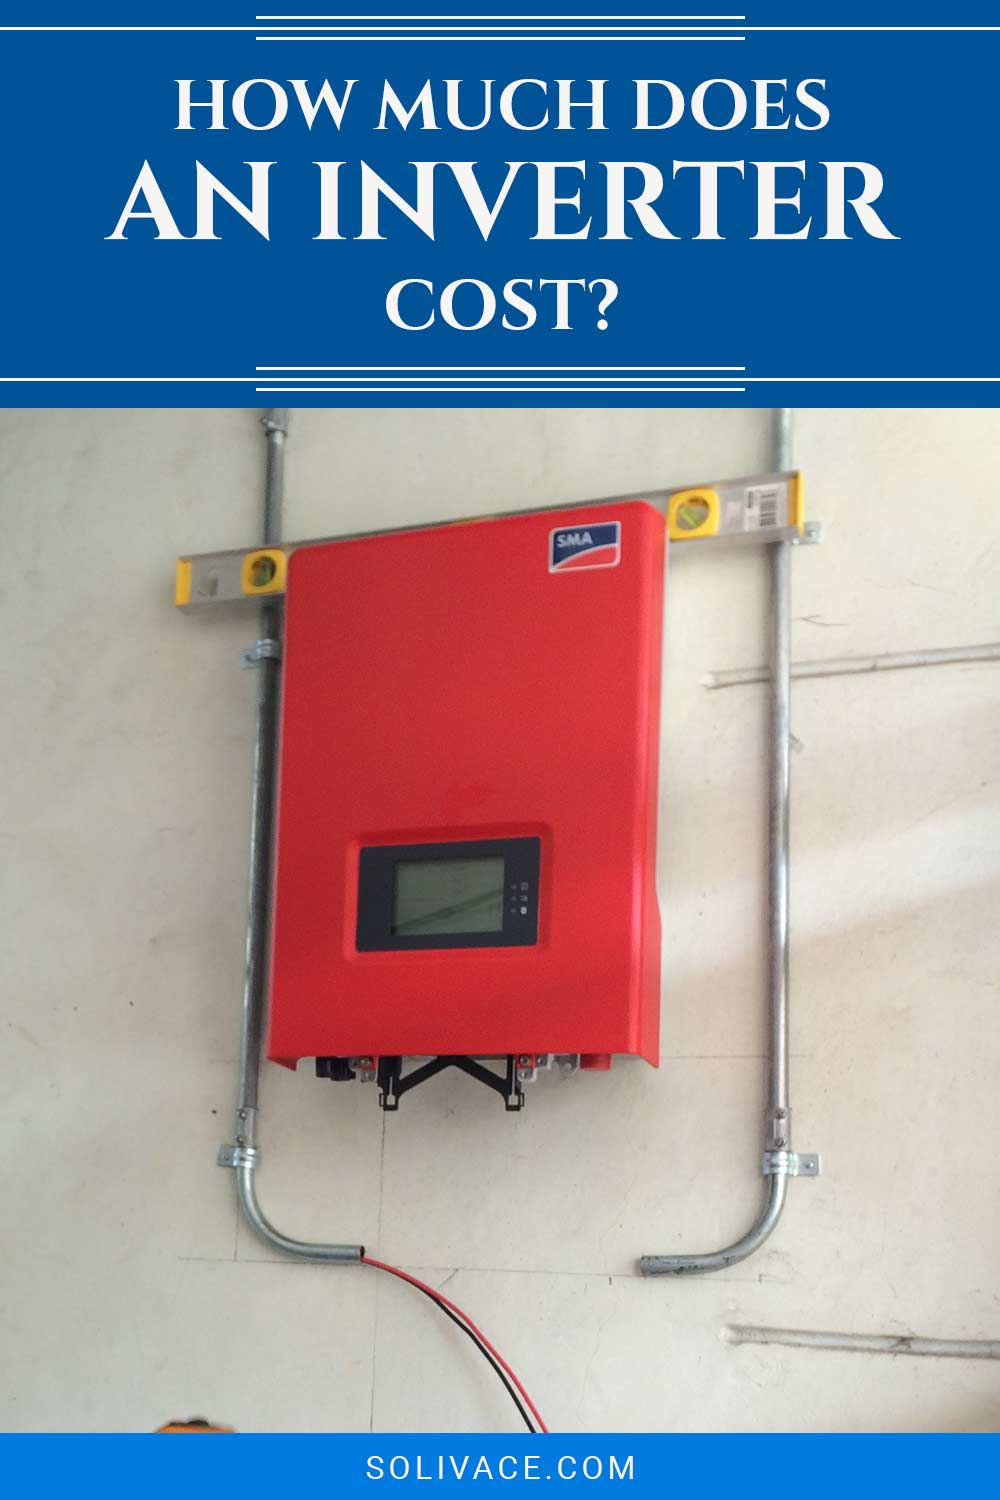 How Much Does An Inverter Cost?